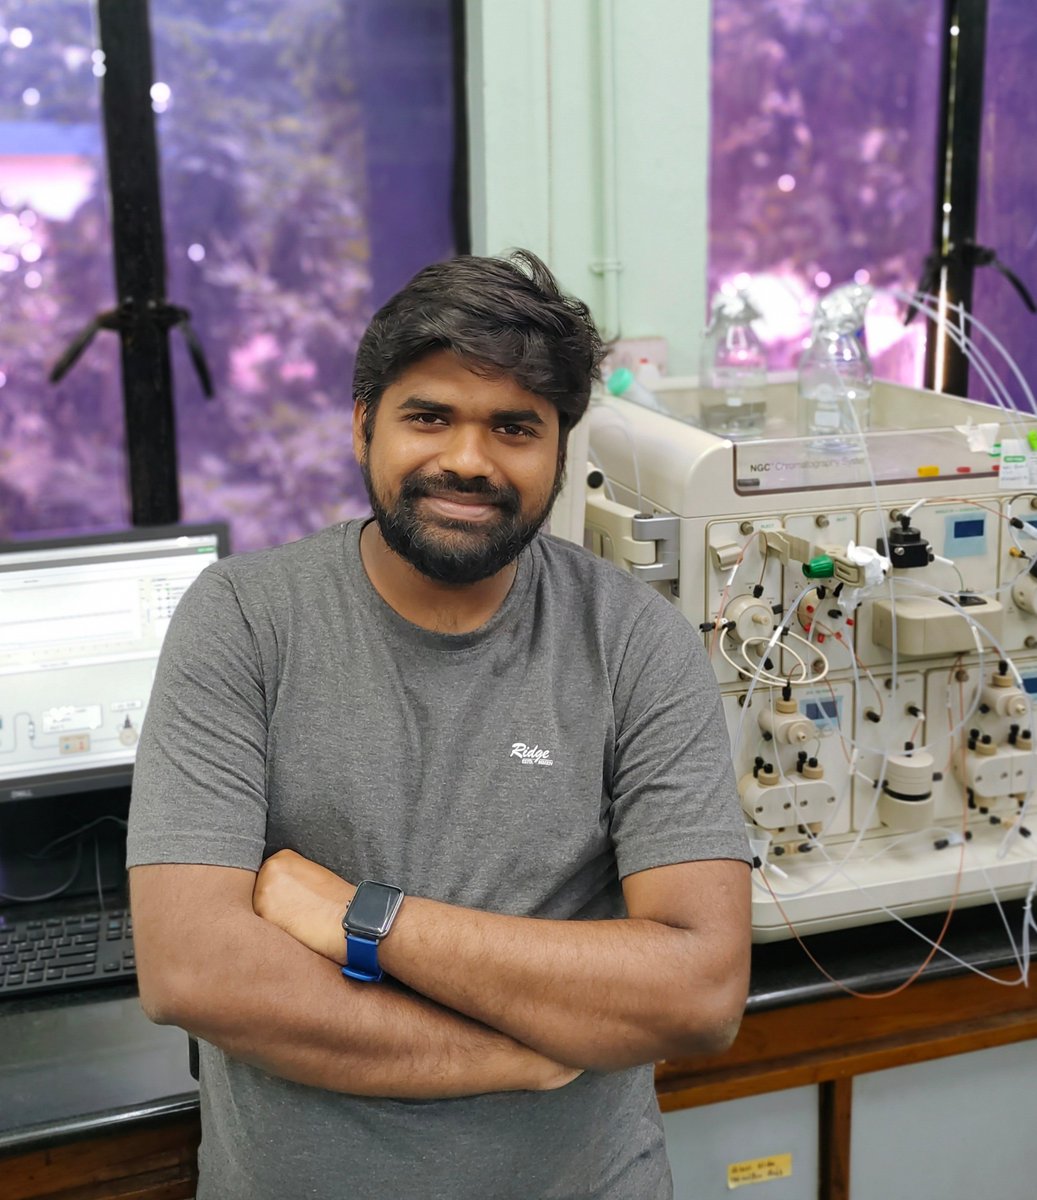 This year is special! We have two finalists for the Inspiring Science Award by @TNQTechnologies. Many congratulations to @Pradeepkumar_2 and @SarangiSitanshu. @CSIR_IND